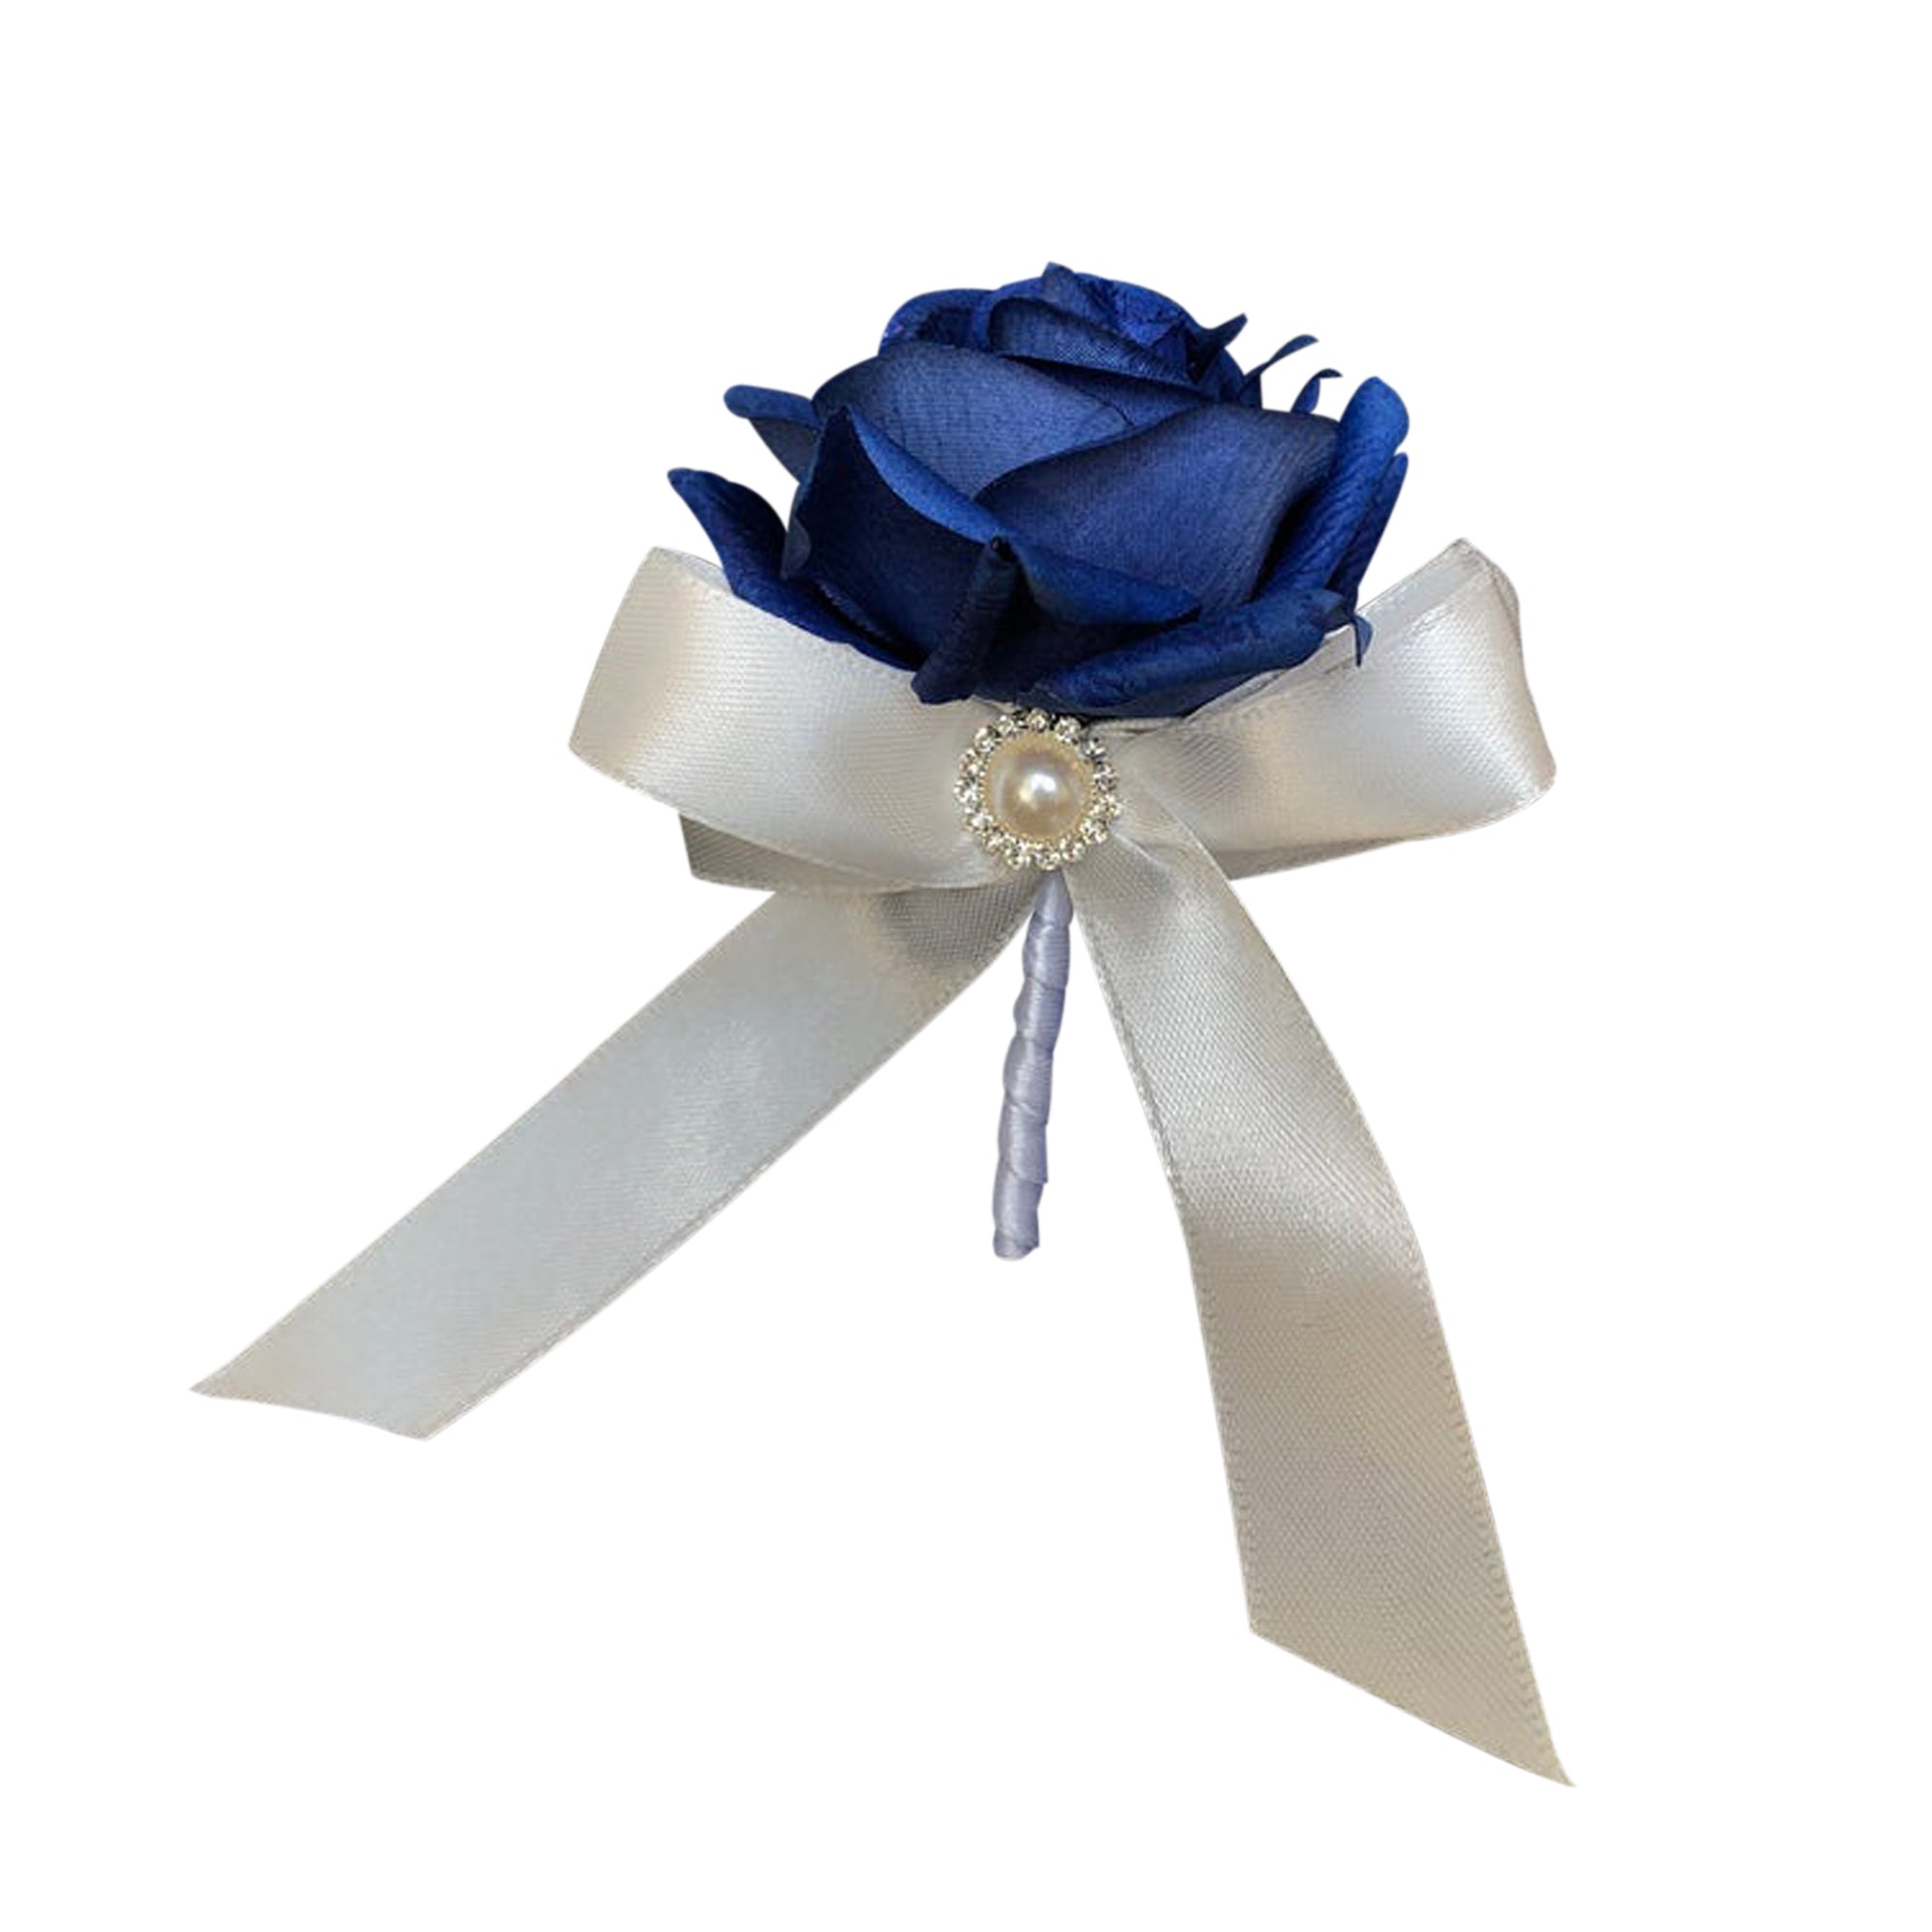 Corsage and Boutonniere Set Royal Blue Rose Fake Flower